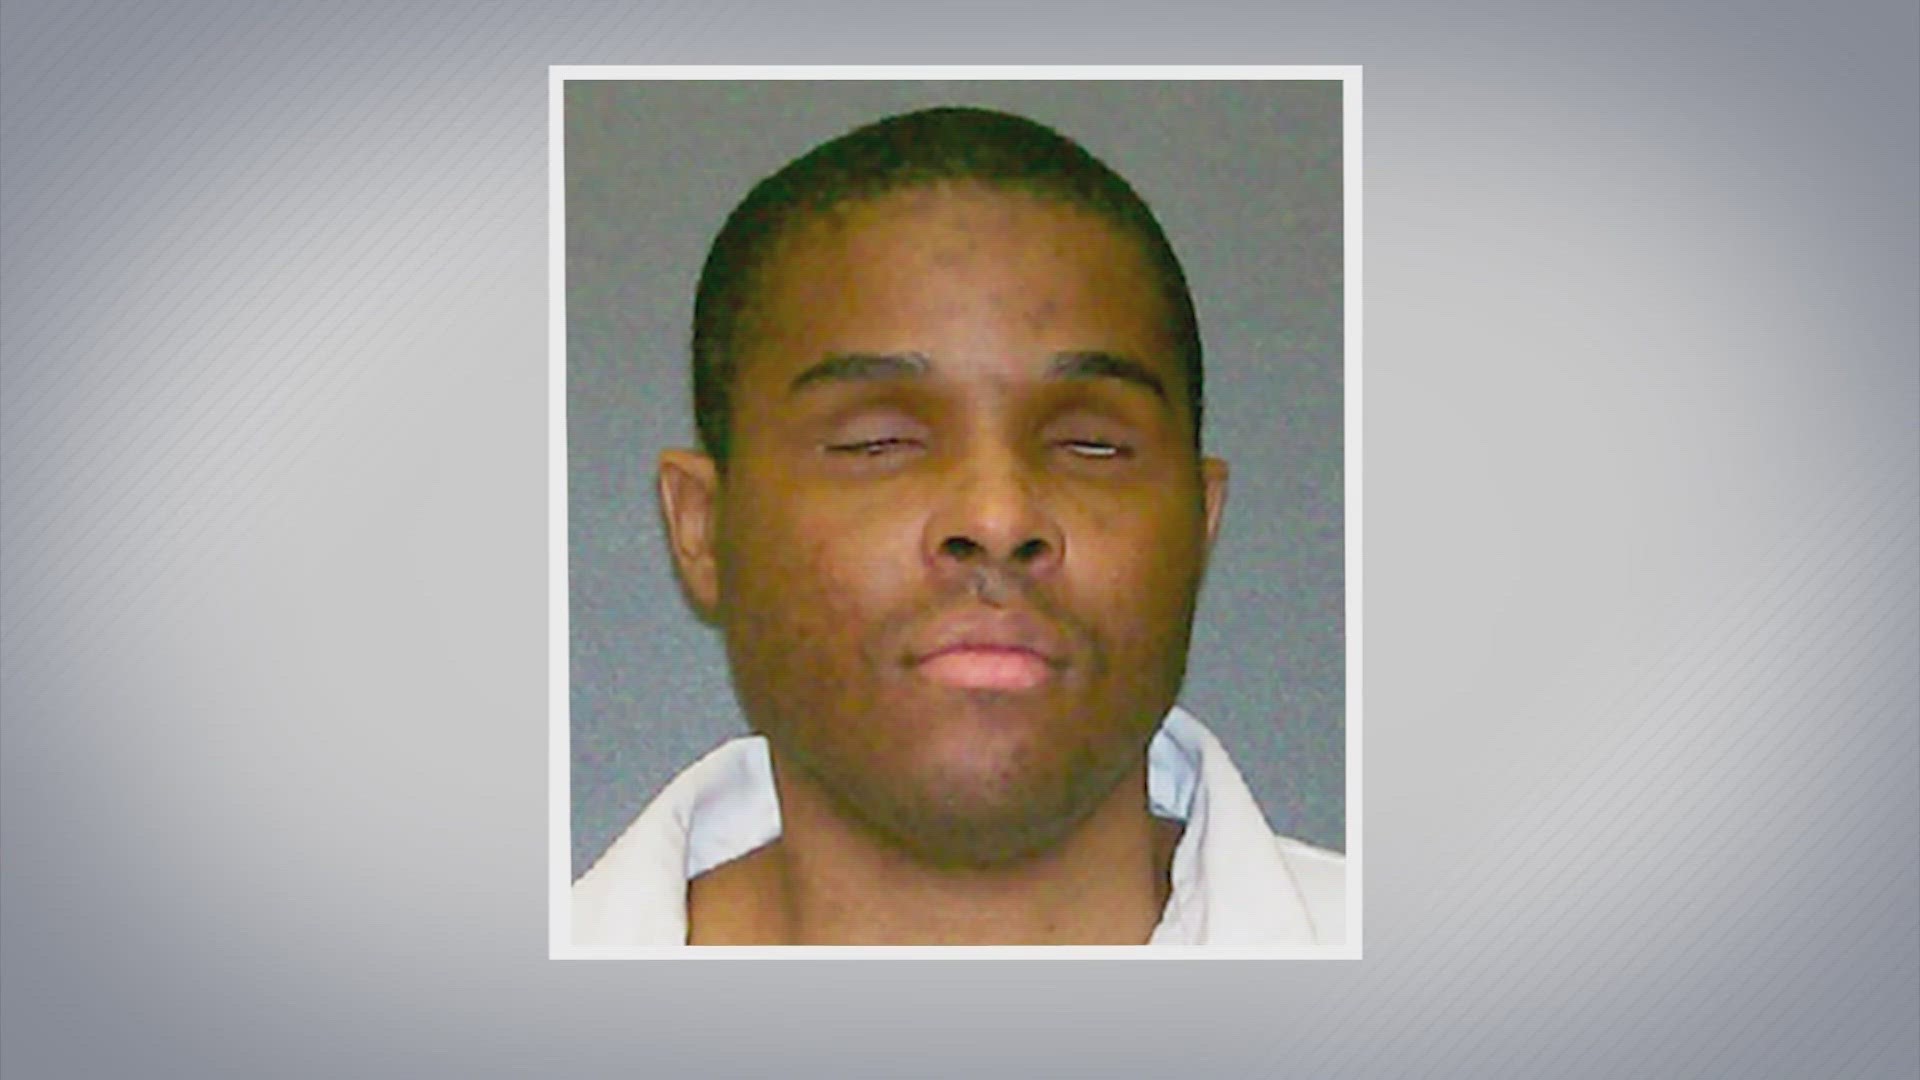 Andre Thomas, 39, was arrested in 2004 for killing his estranged wife and their 4-year-old son and 1-year-old daughter.